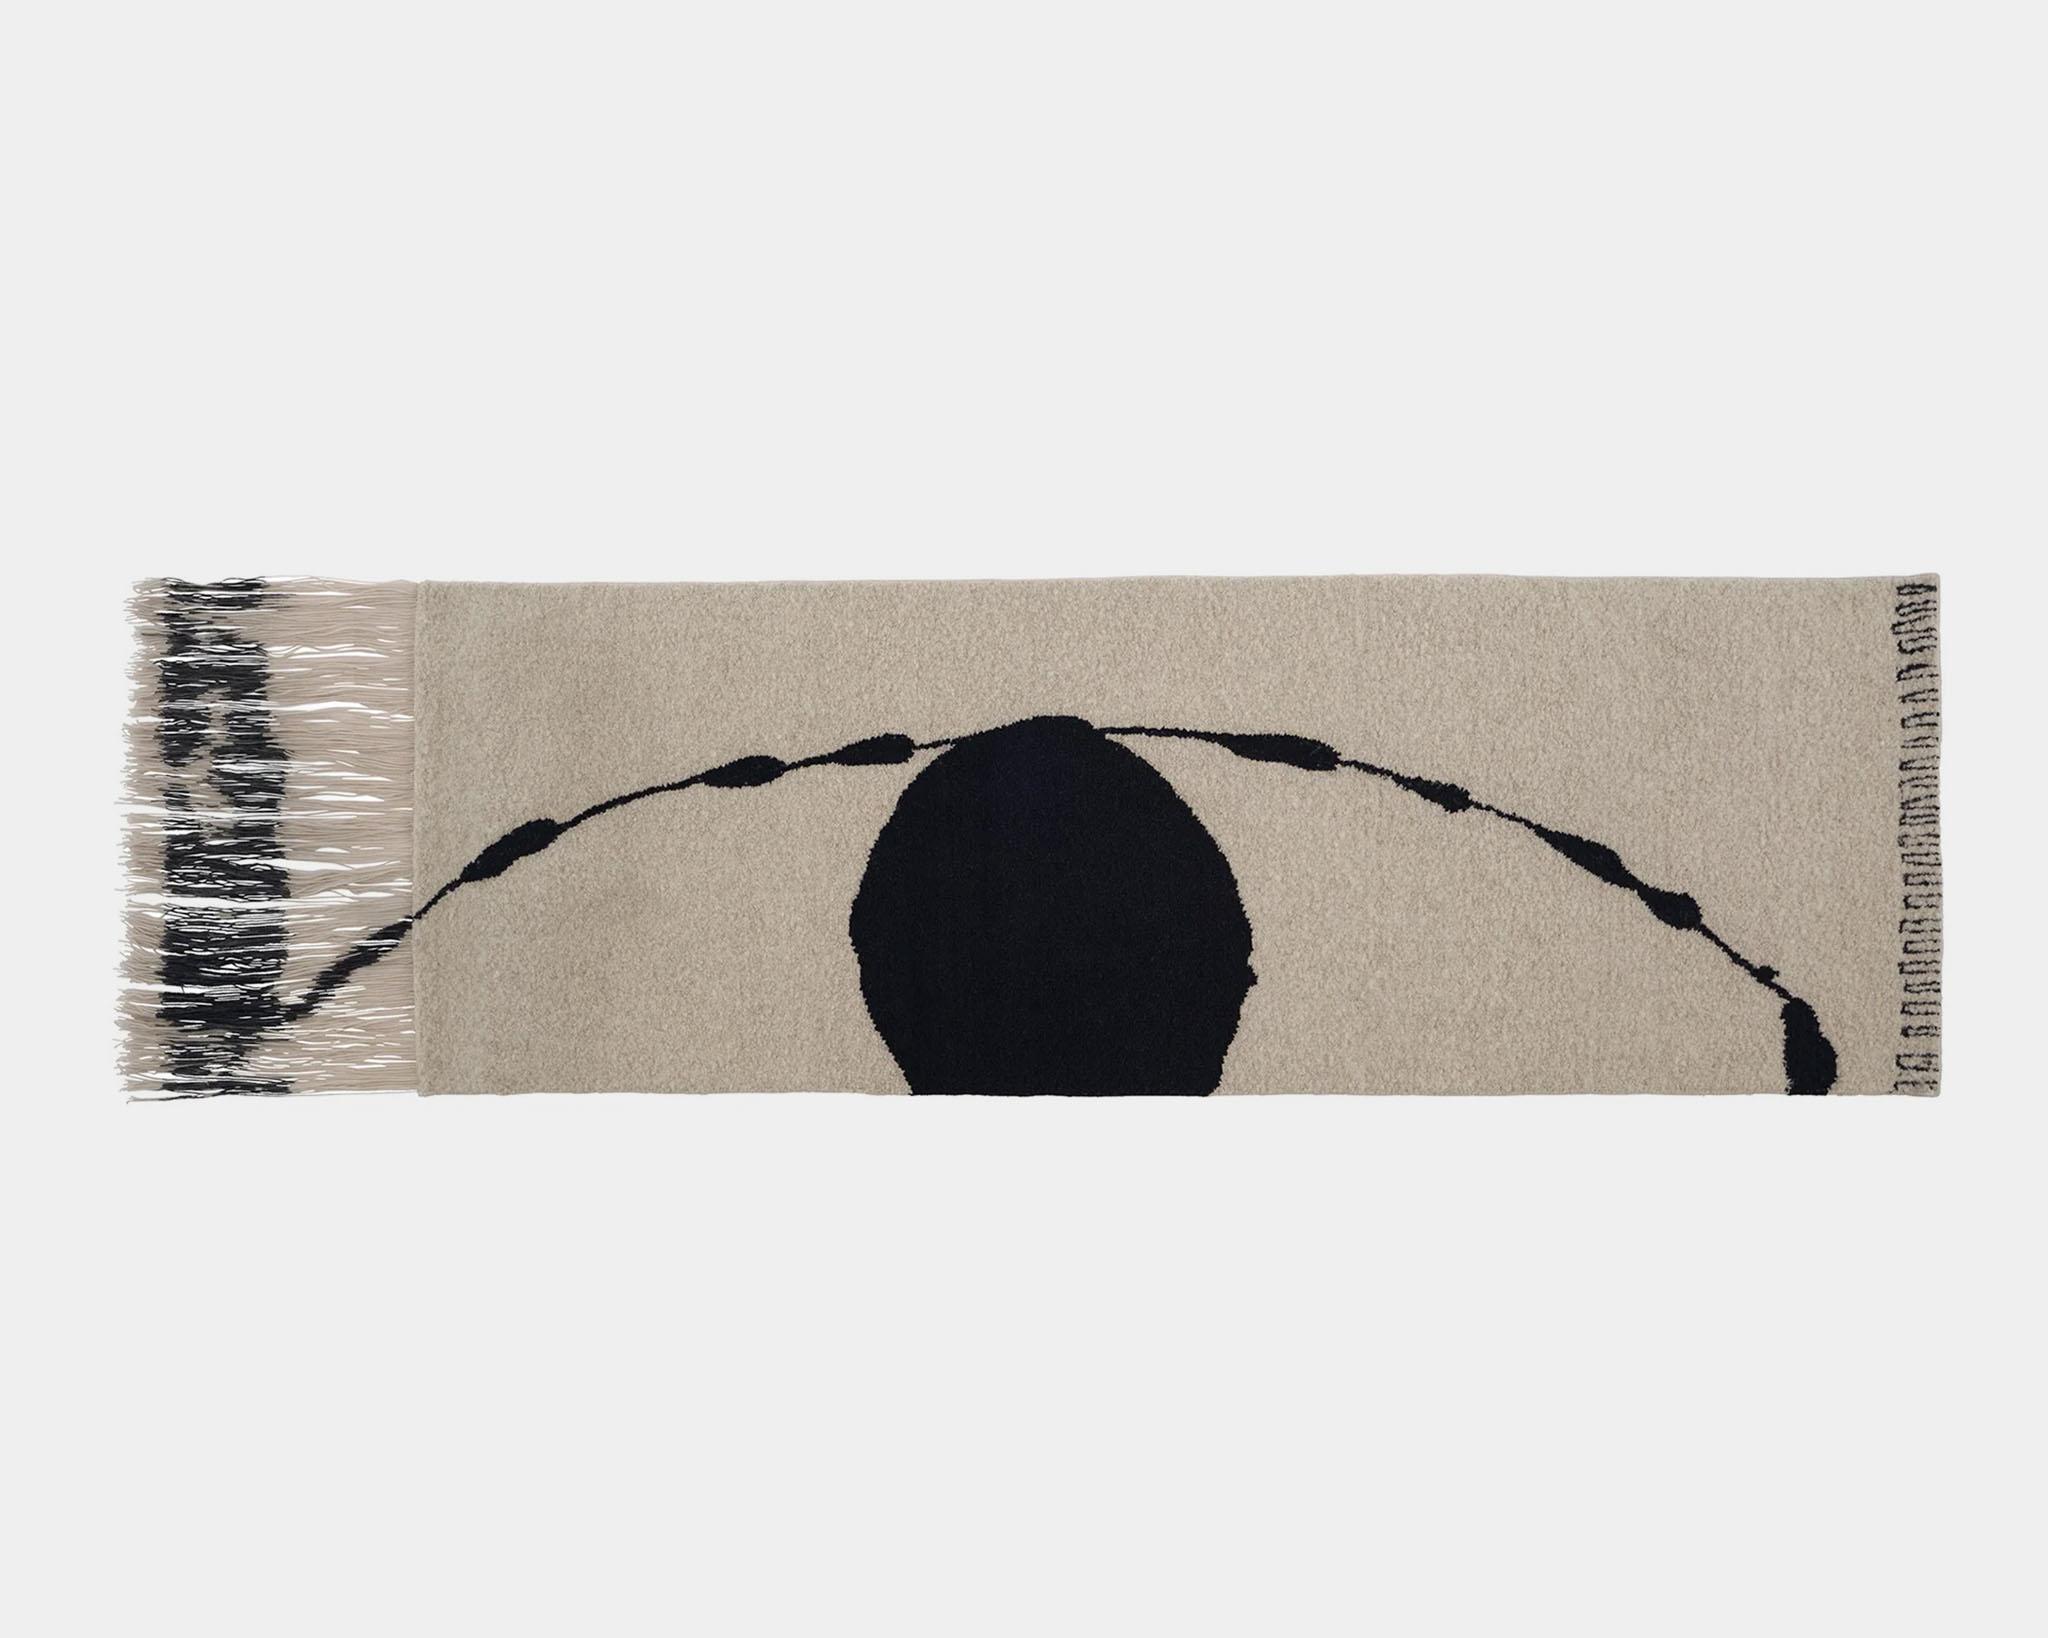 Zenith Moon, 'Axiom' collection by Linie Design

Rectangular handmade rug. 
Material: Wool 
Hand knotted rug

Dimensions: 80 cm x 250 cm

An artistic and visually alluring hand-knotted rug from Linie Design. Featuring an abstract arched line with a